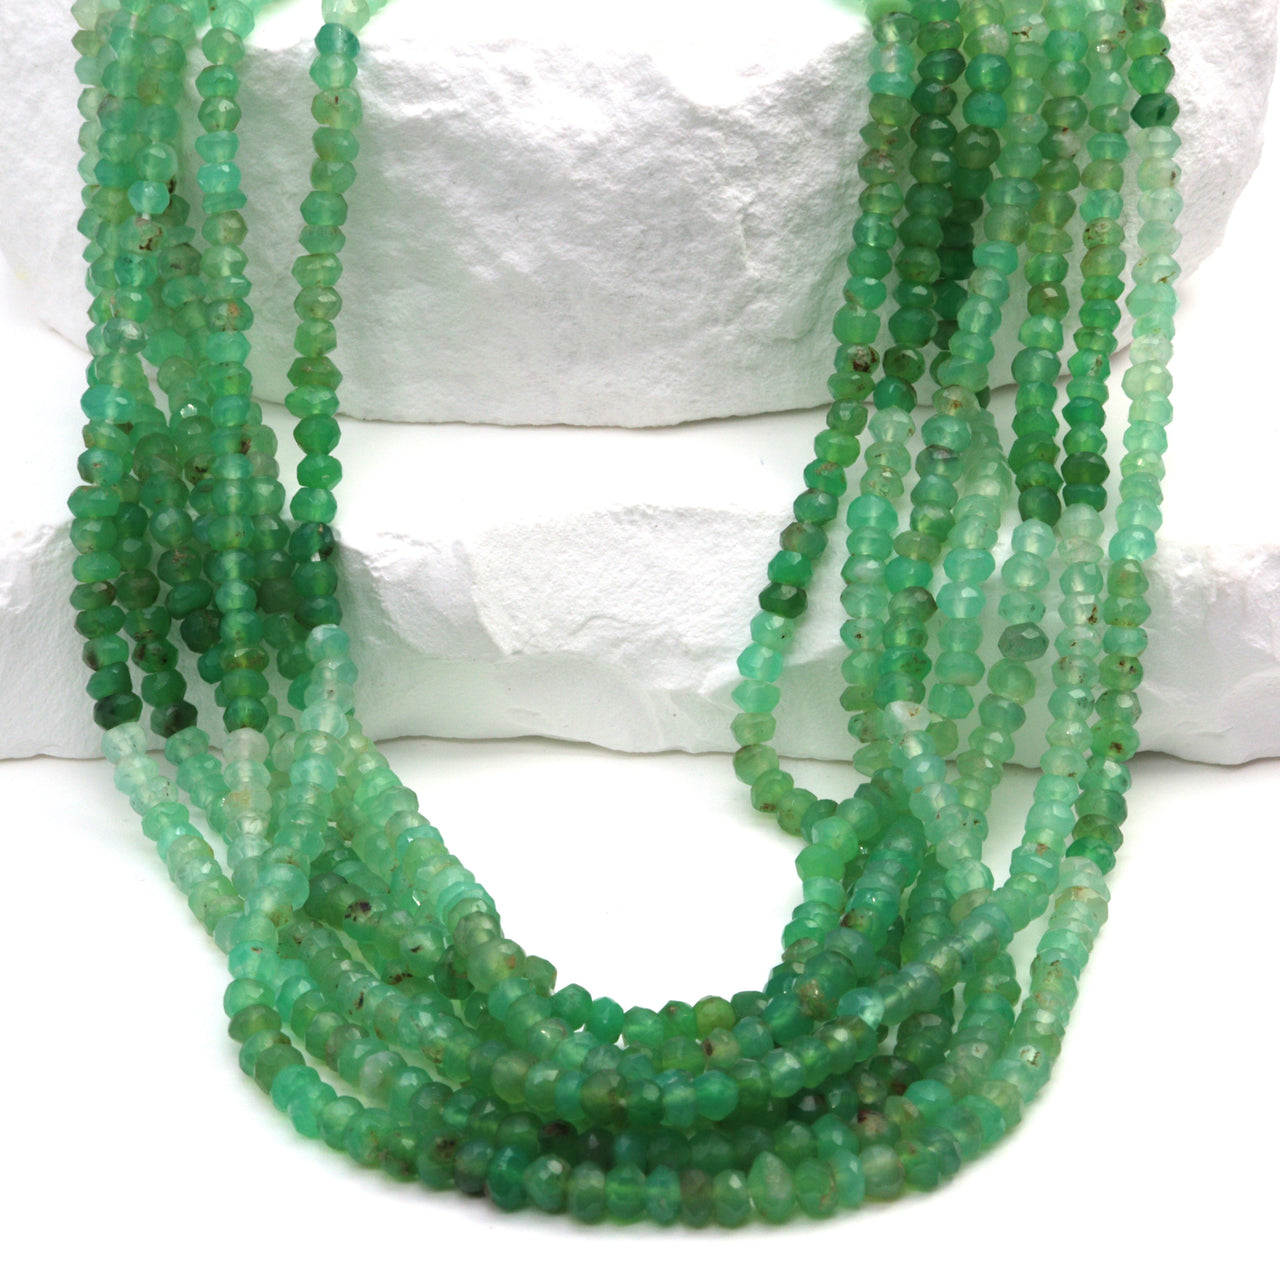 Ombre Green and White Chrysoprase 3mm Faceted Rondelles